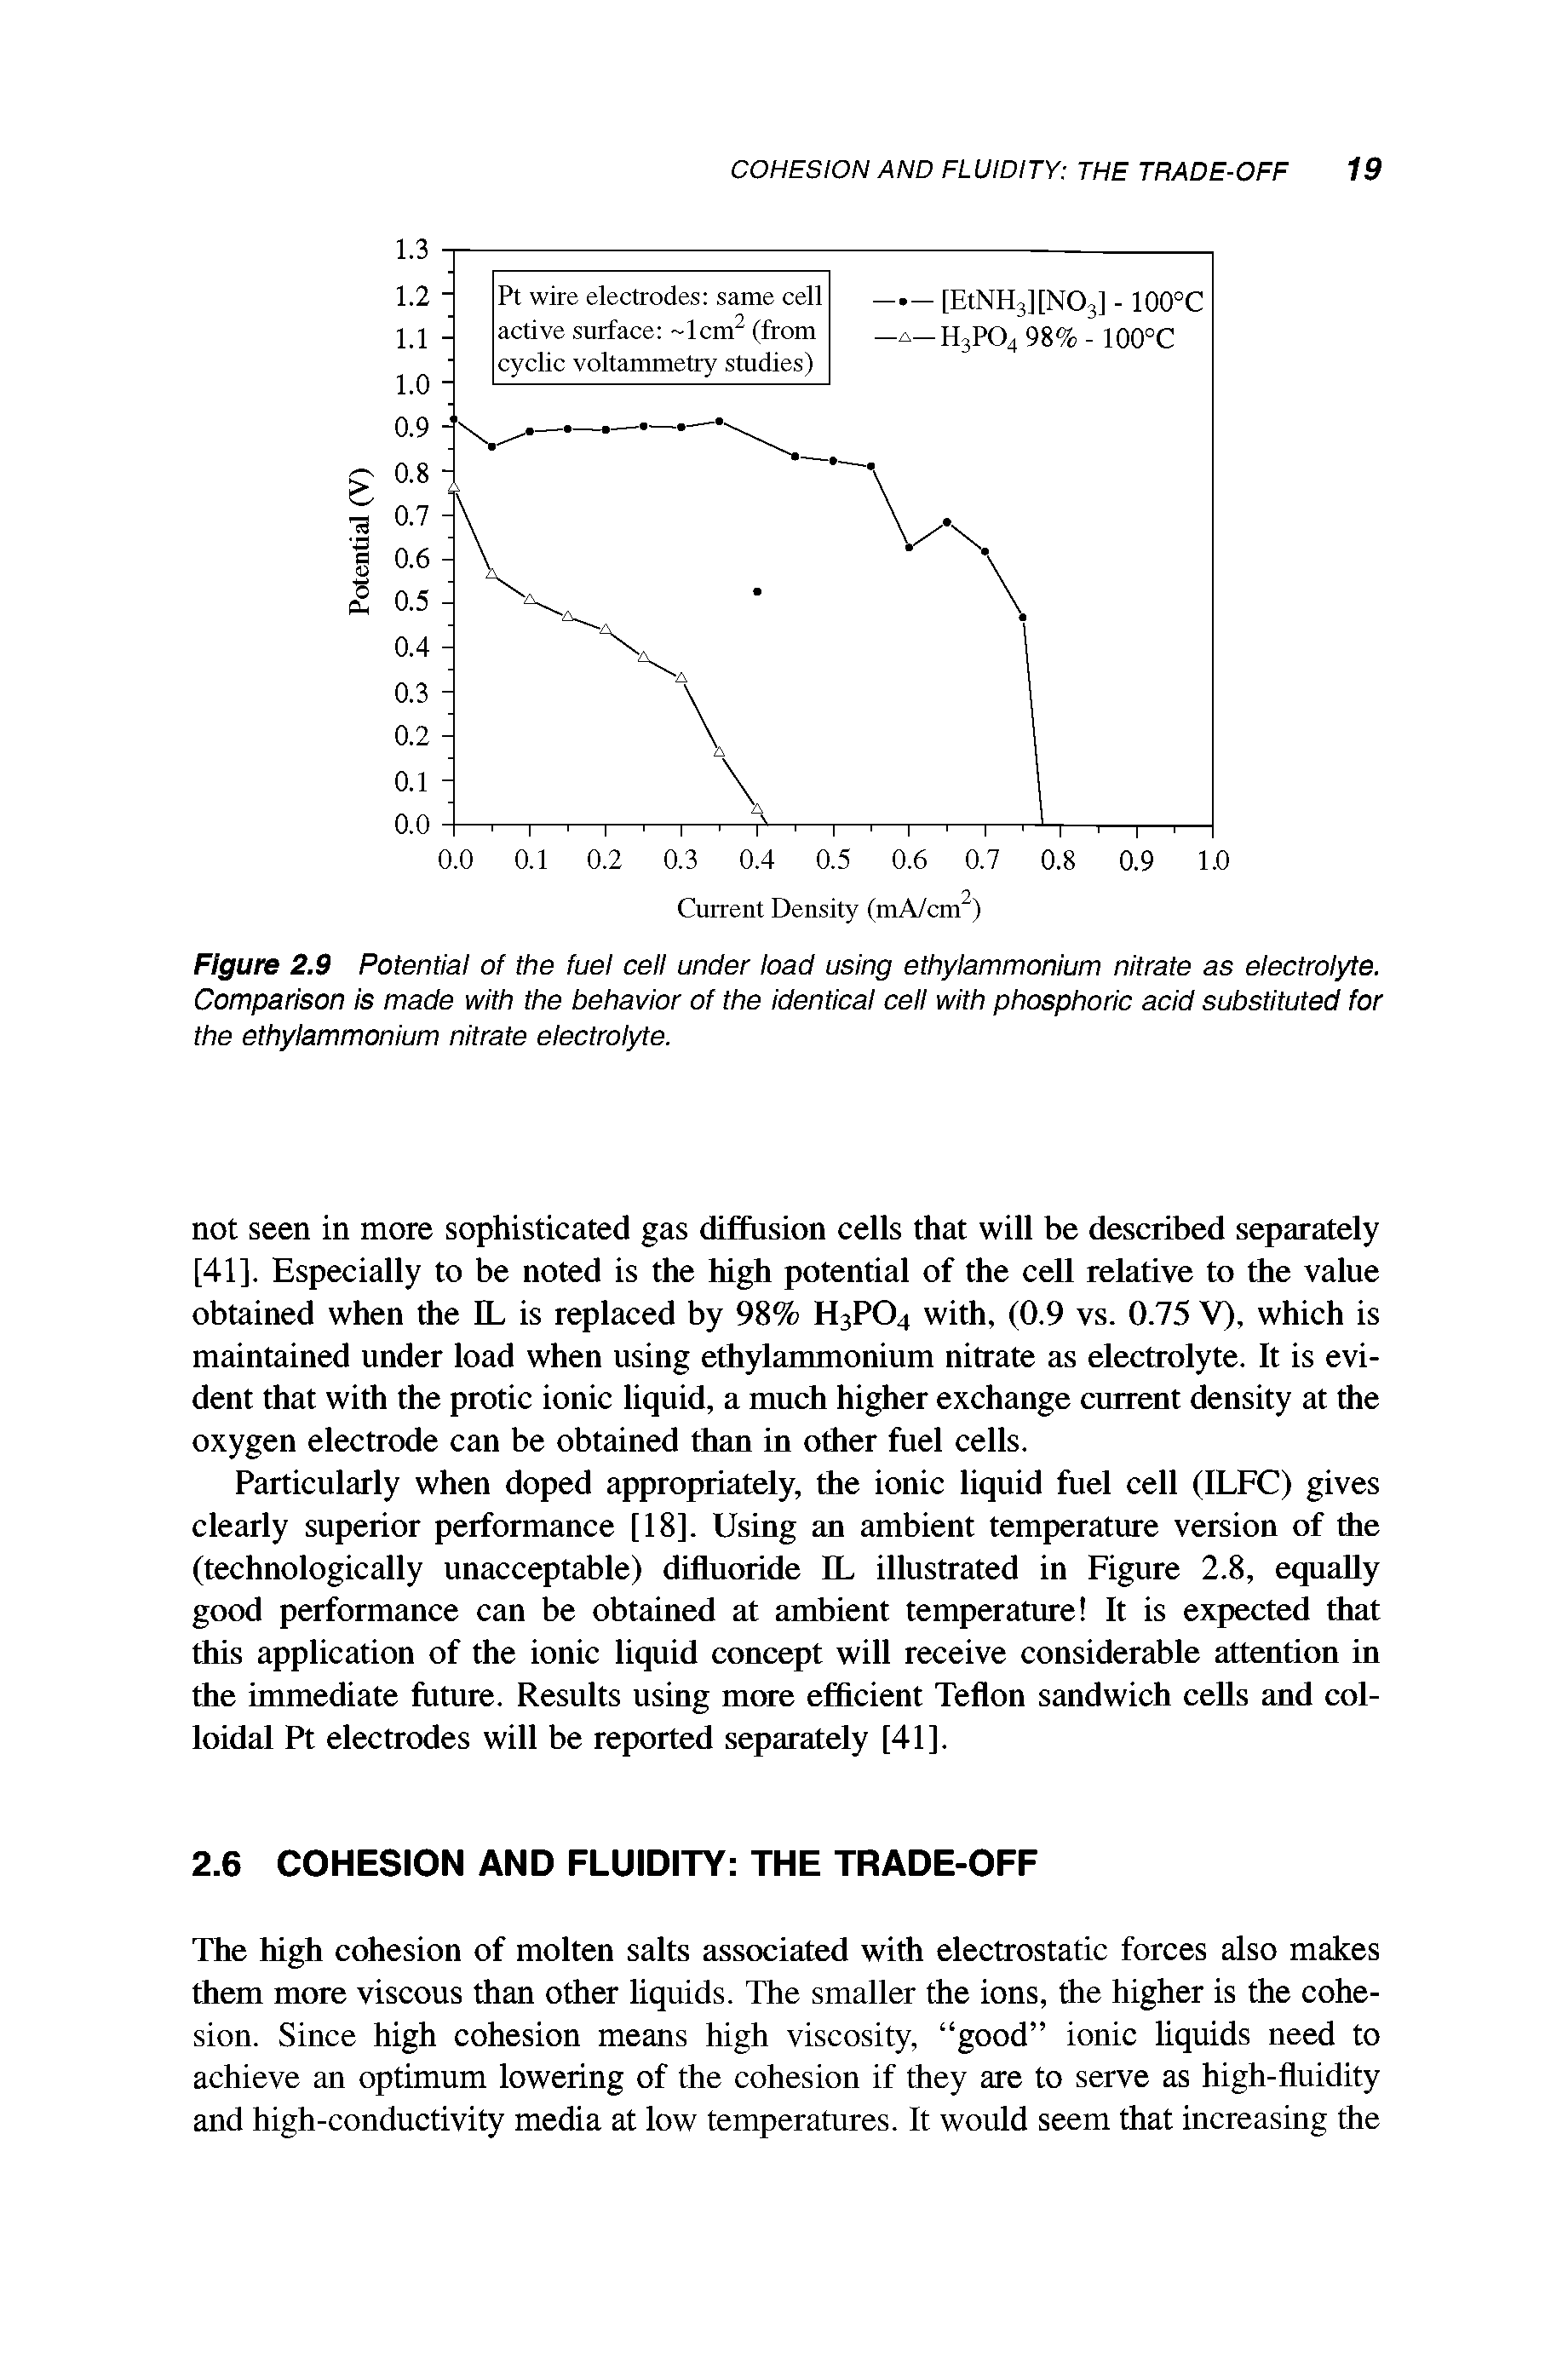 Figure 2.9 Potential of the fuel cell under load using ethylammonium nitrate as electrolyte. Comparison is made with the behavior of the identical cell with phosphoric acid substituted for the ethylammonium nitrate electrolyte.